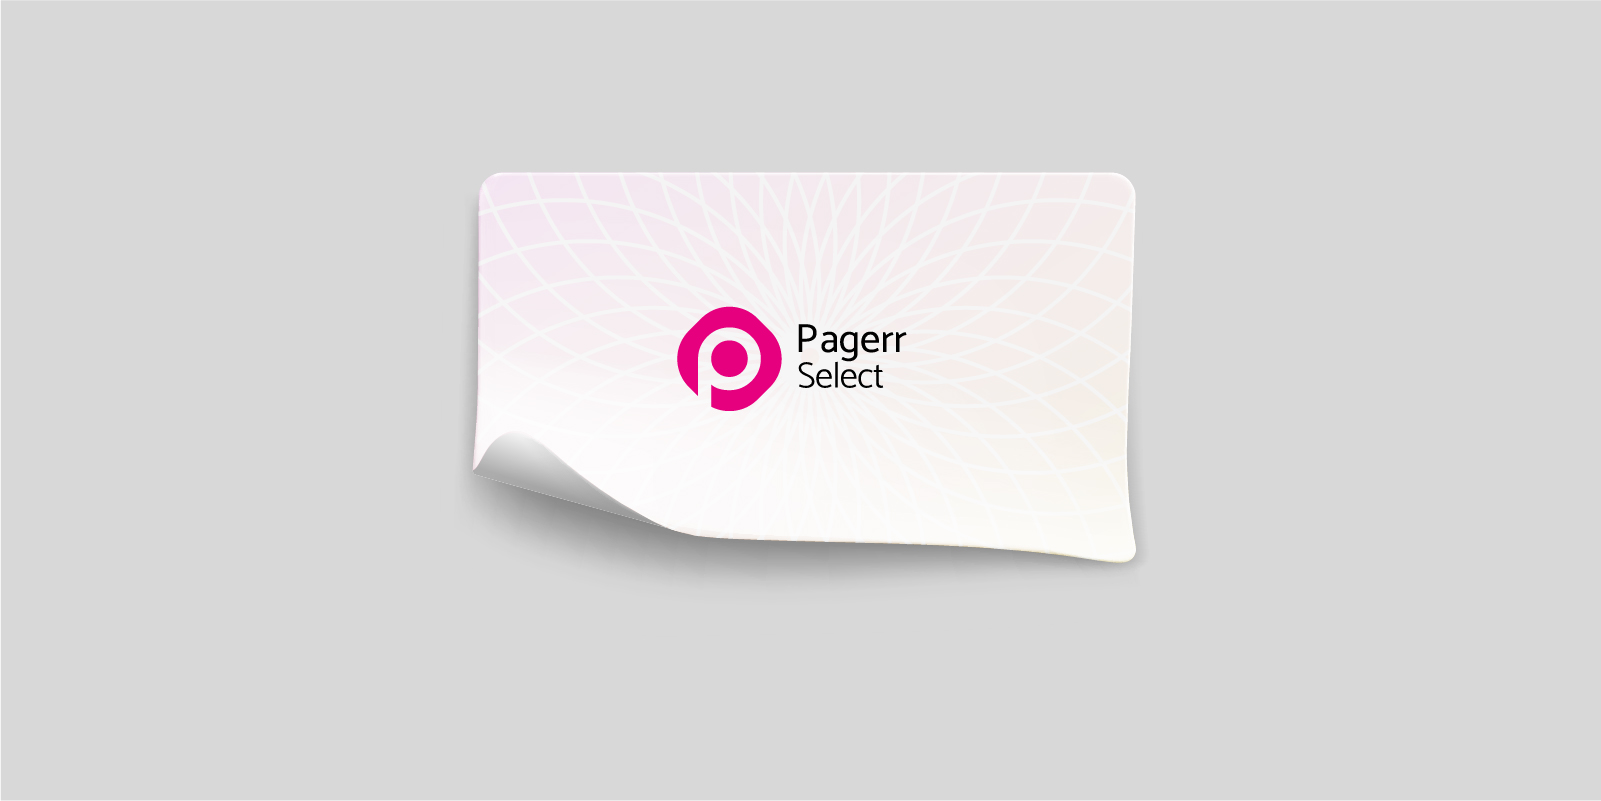 Sheet stickers in Newcastle - Print with Pagerr